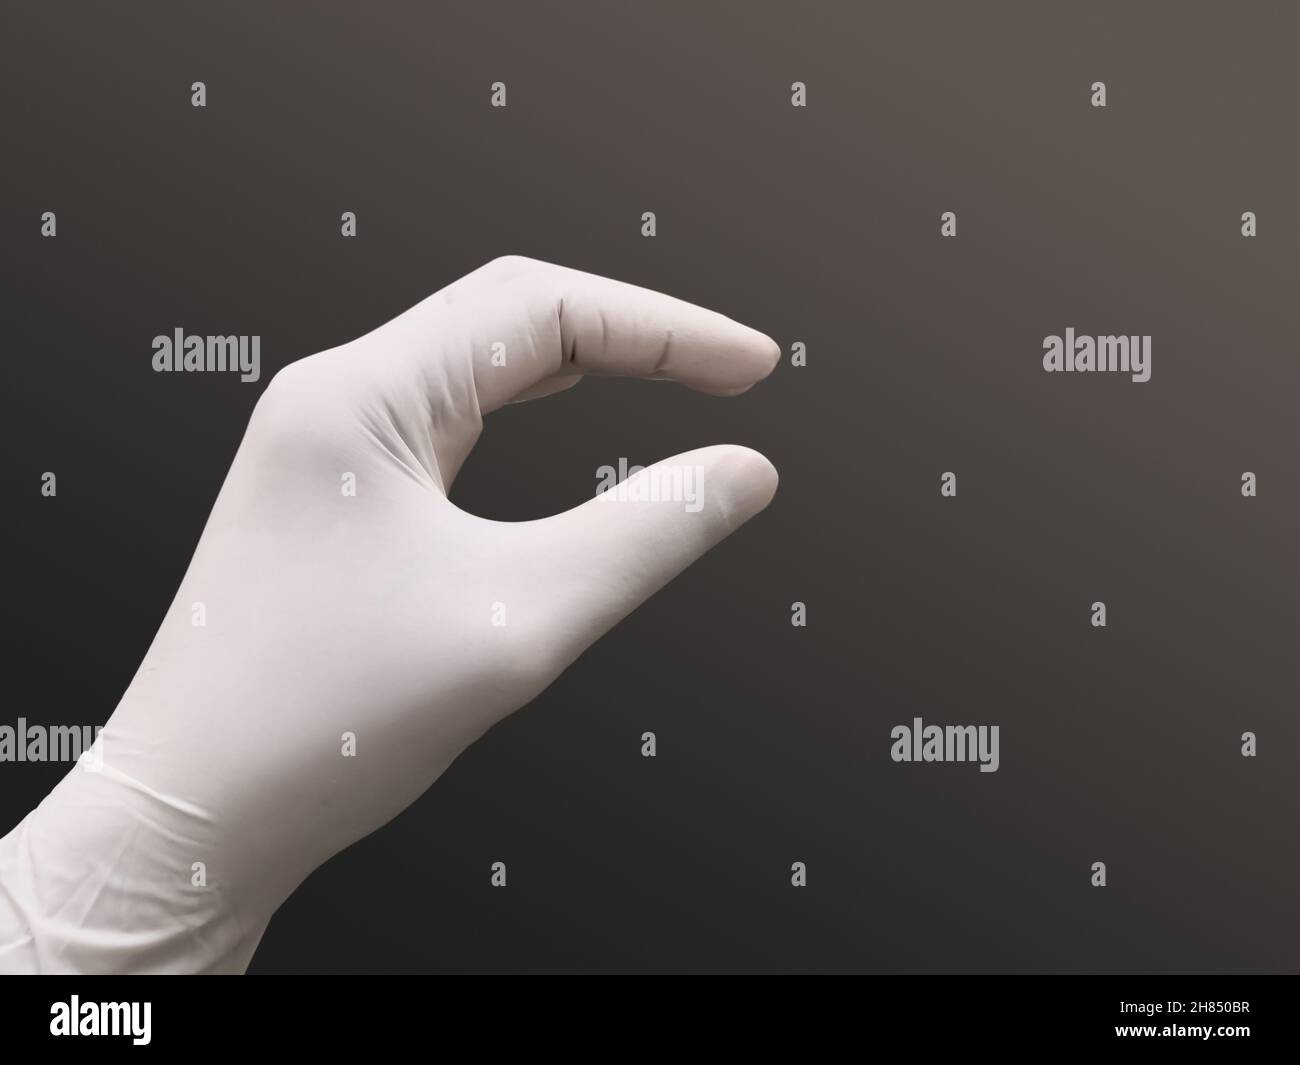 Closeup Image Of Medical Latex Surgical Glove In Hand. Isolated Grey Background. Selective Focus Stock Photo